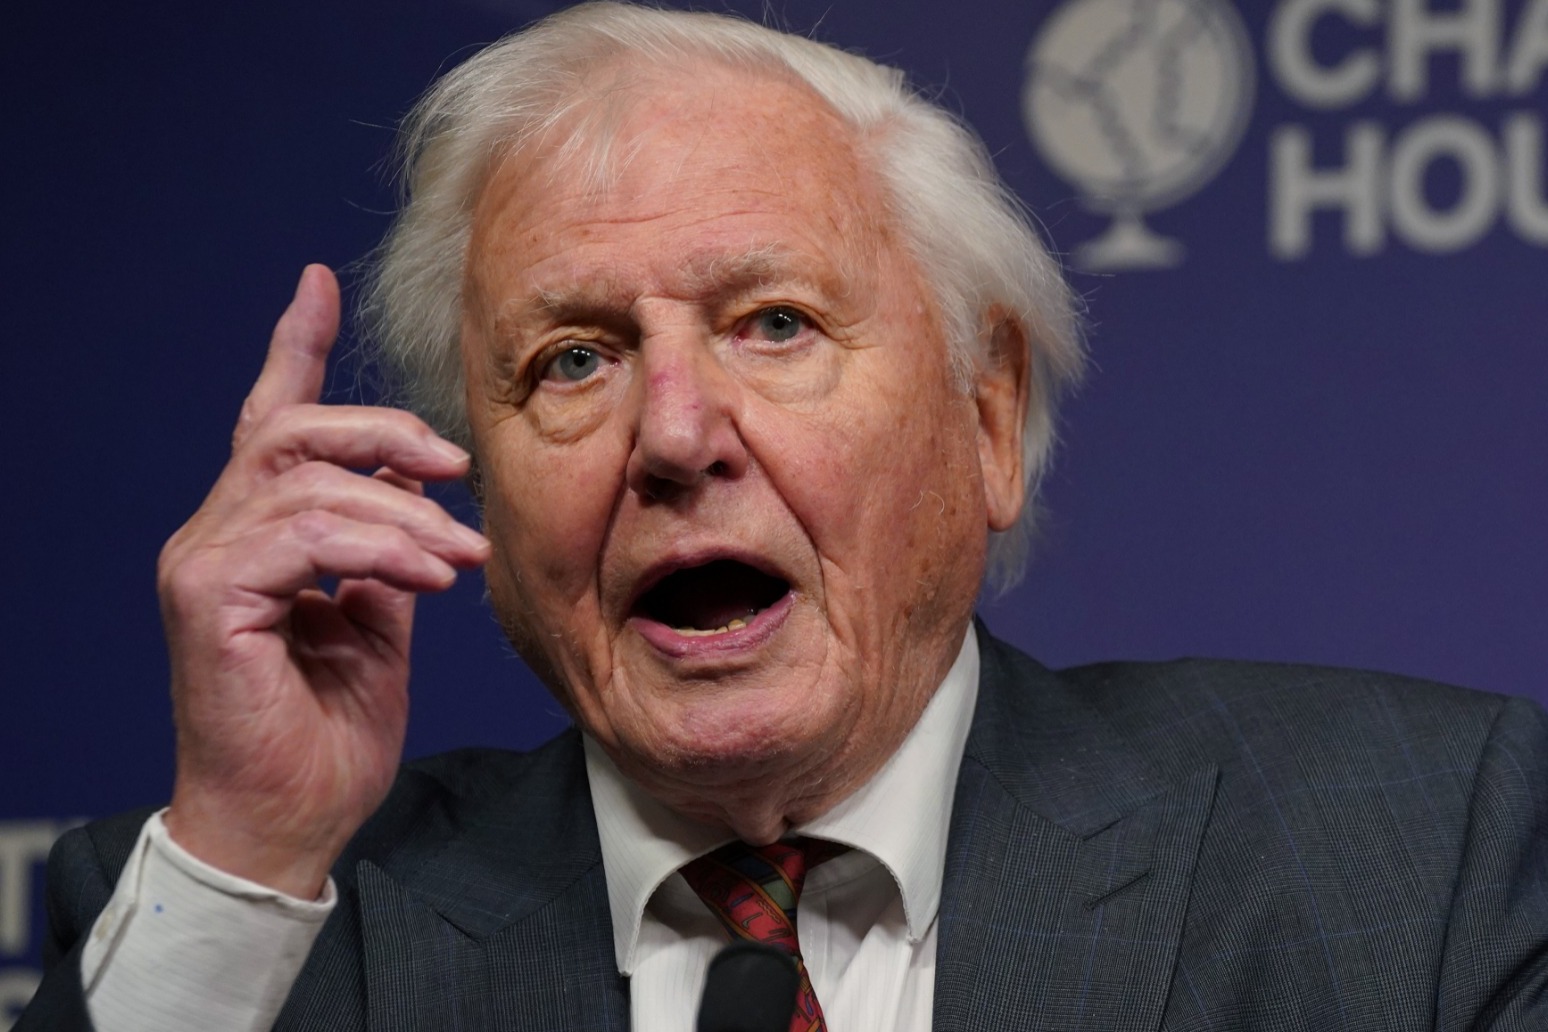 David Attenborough calls for nature’s role to be recognised amid climate fight 